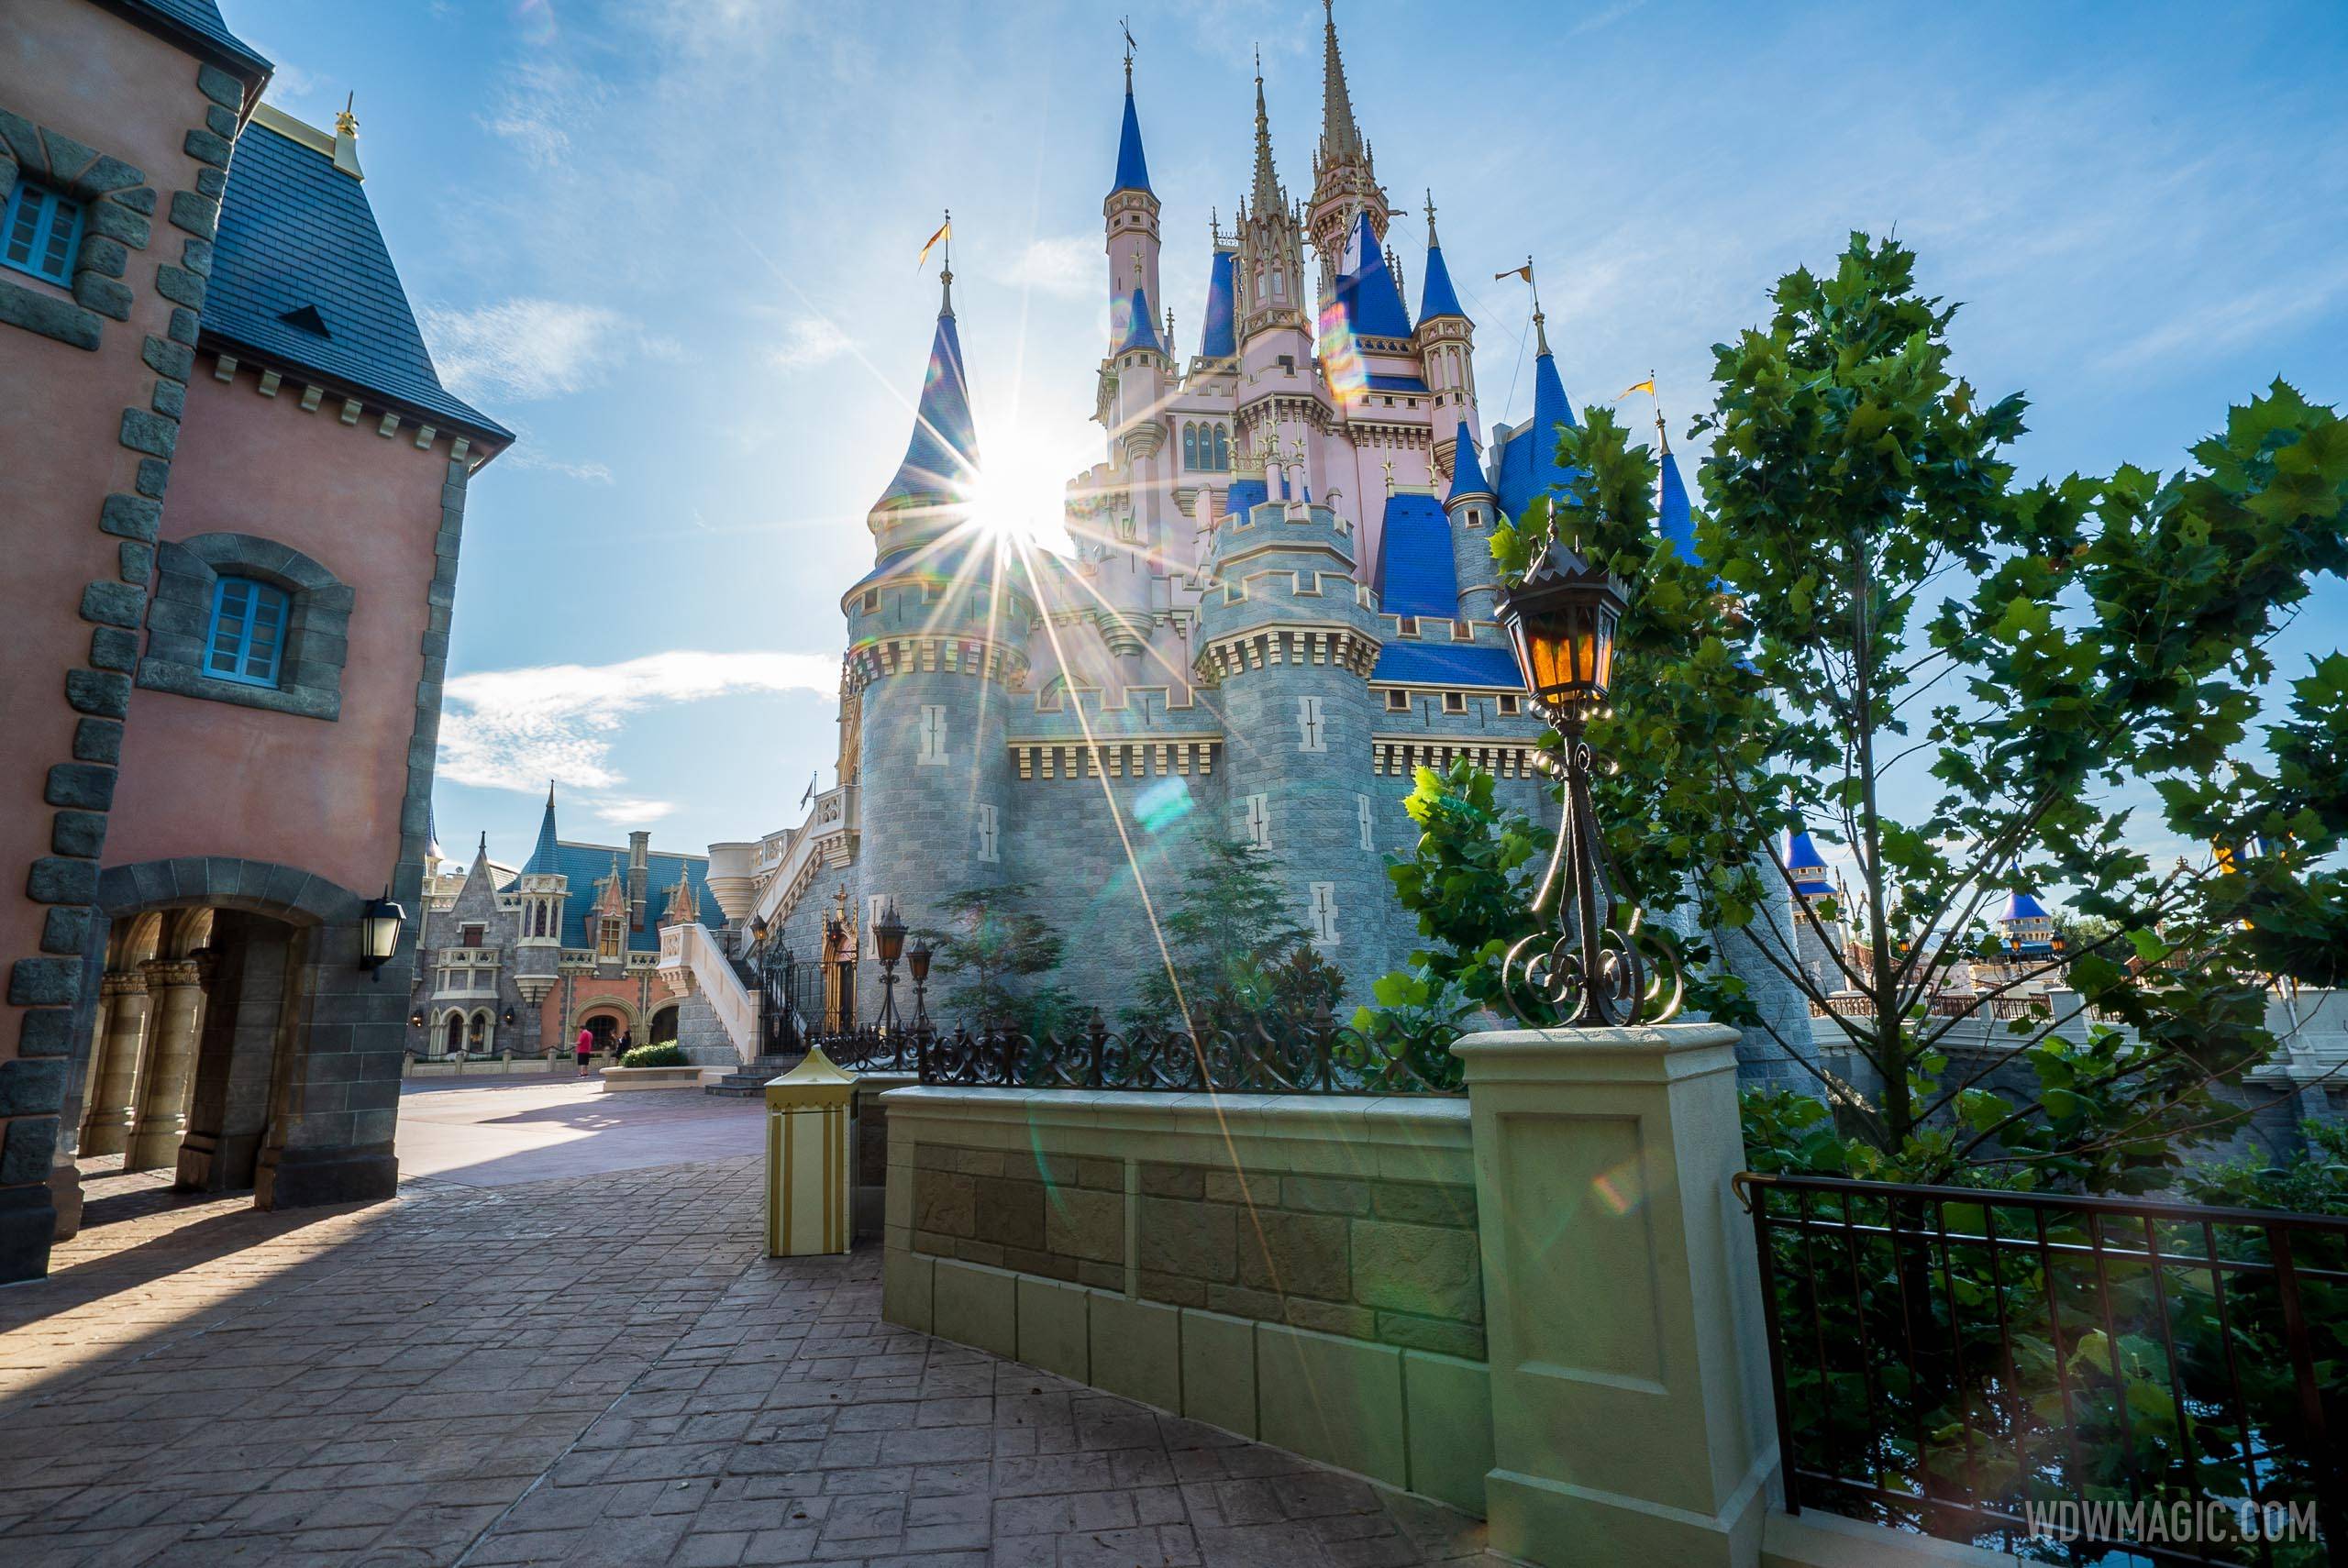 Completed new-look Cinderella Castle